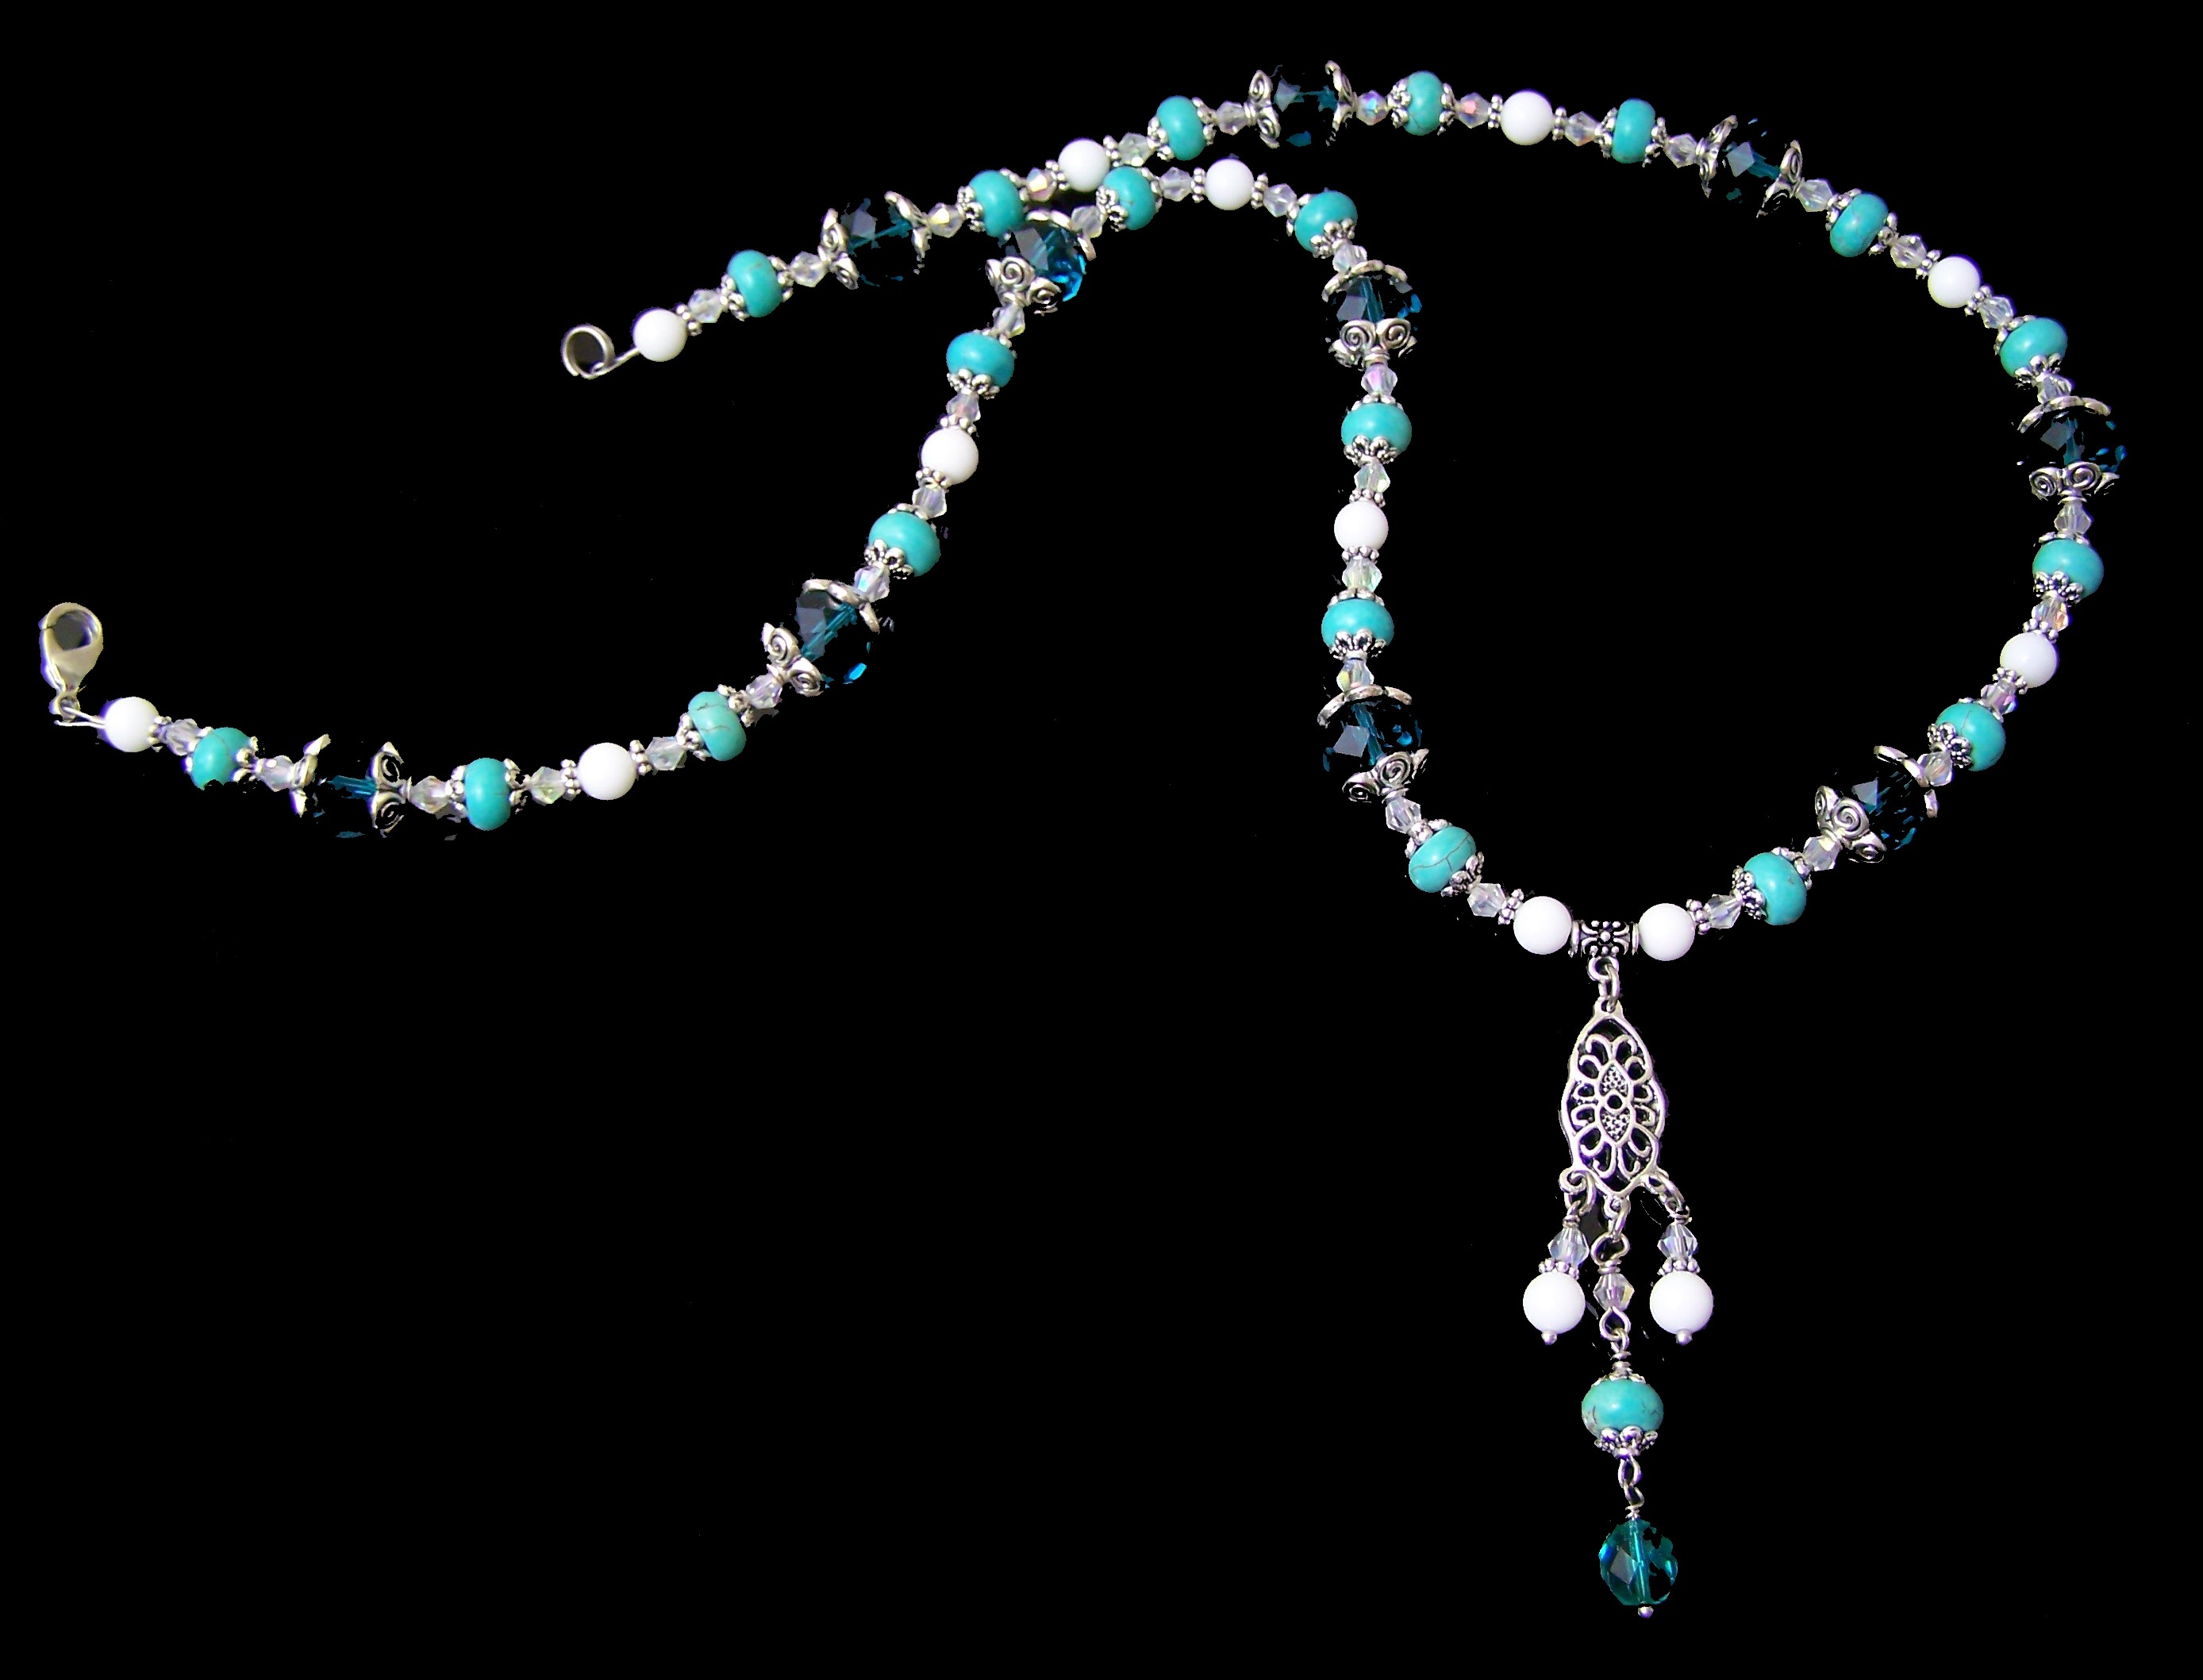 Calling Winds Necklace Free Beaded Jewelry Making Pattern